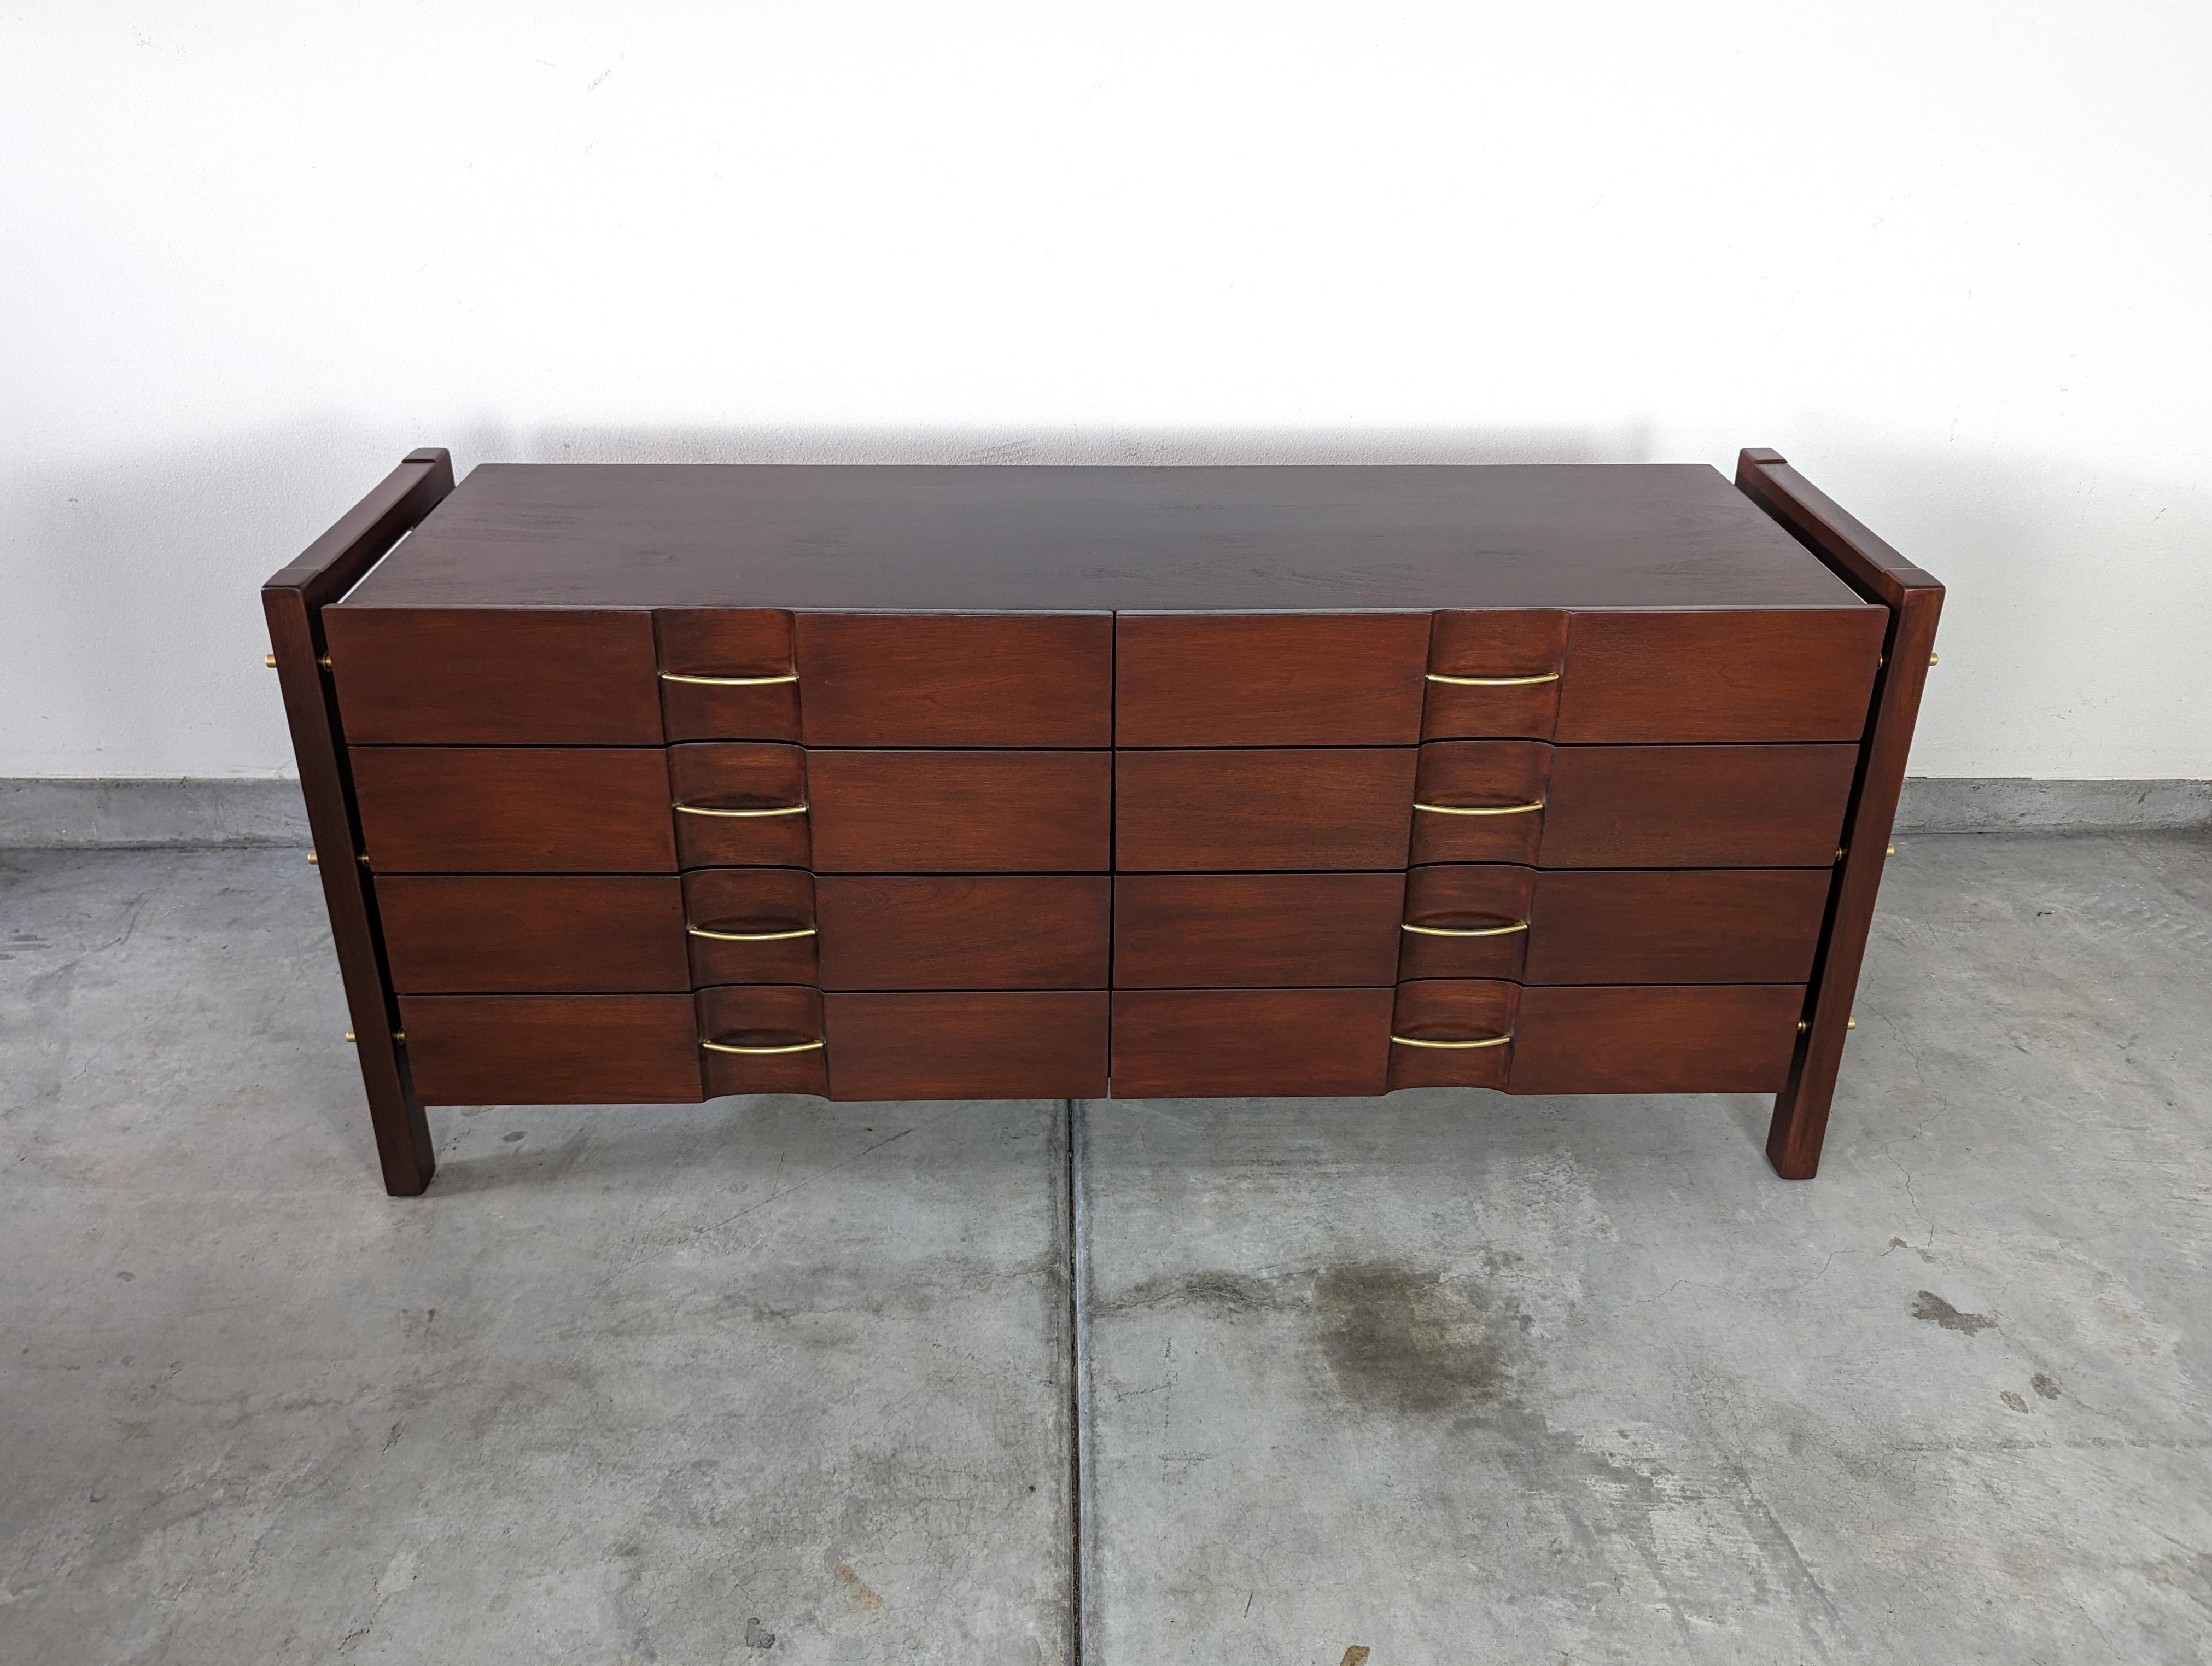 For sale is a spectacular mid-century dresser designed by the renowned Edmond J. Spence and manufactured by the esteemed Industria Mueblera of Mexico. This unique piece showcases the exceptional quality and timeless elegance of Spence's designs and